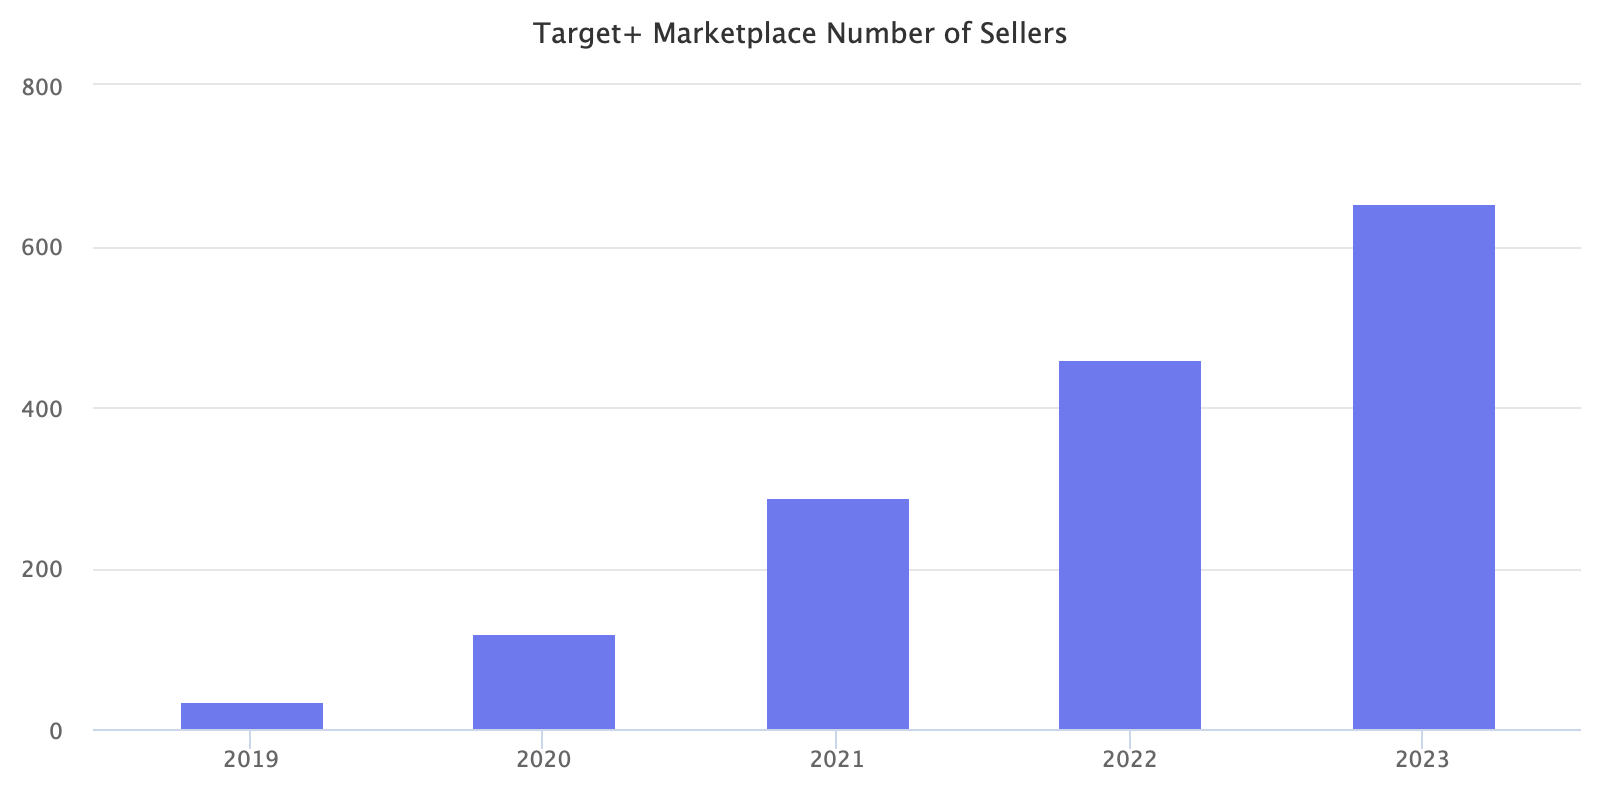 Target+ Marketplace Number of Sellers